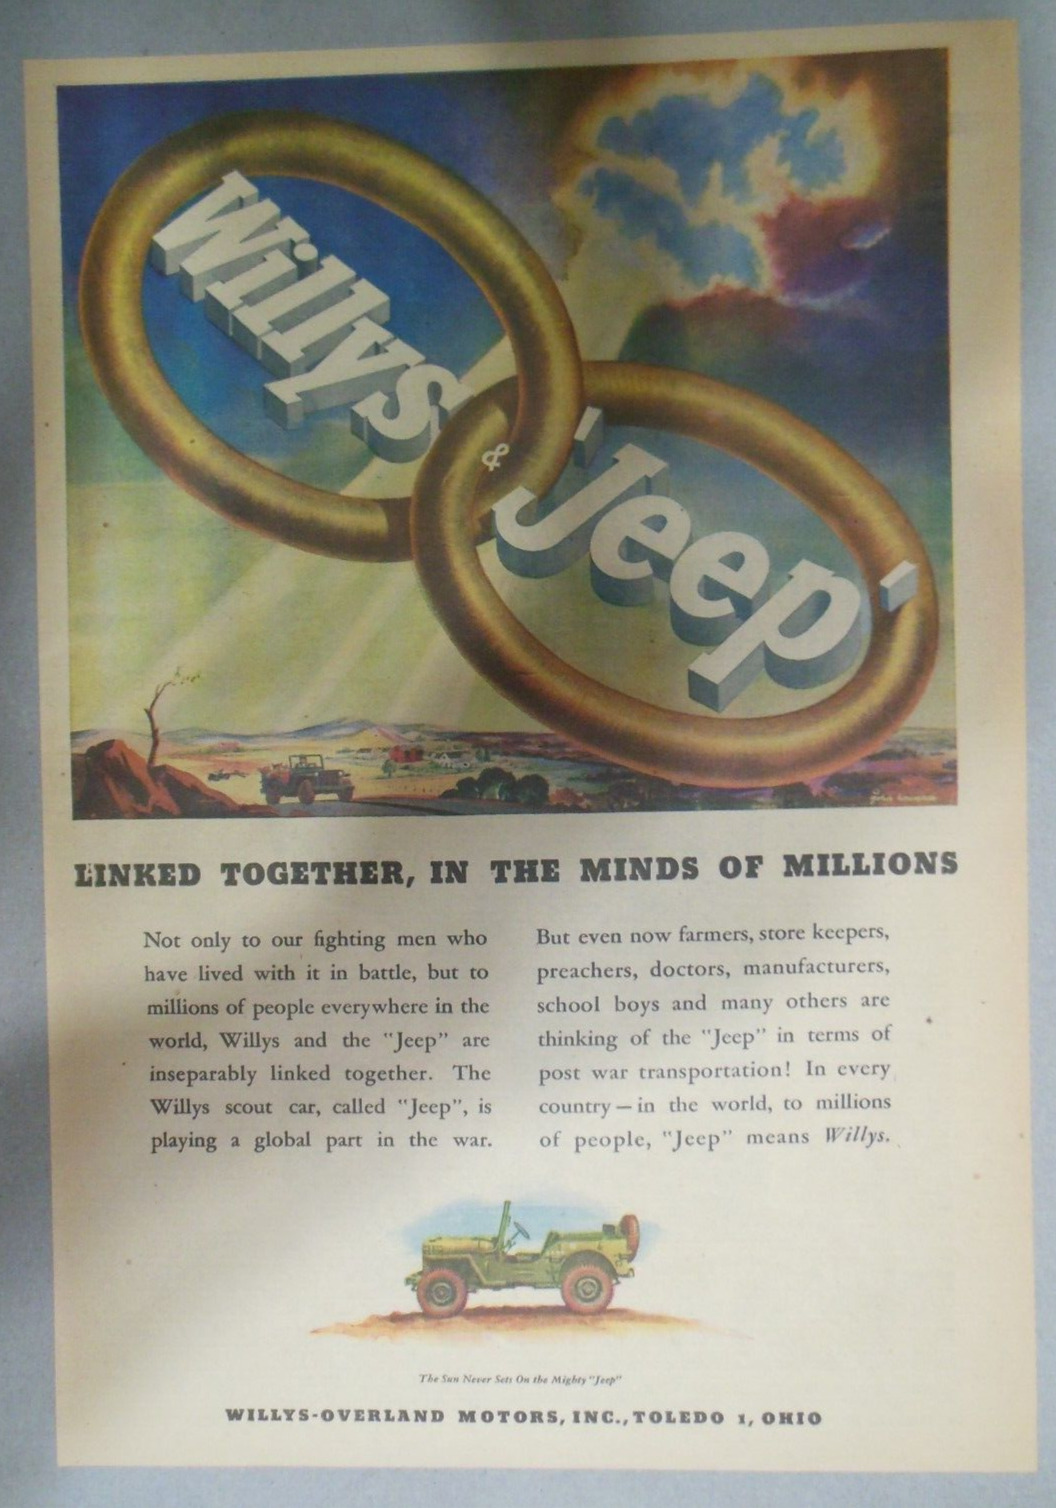  Vintage advertisement for Willys Jeep, illustrated by John C Howard.